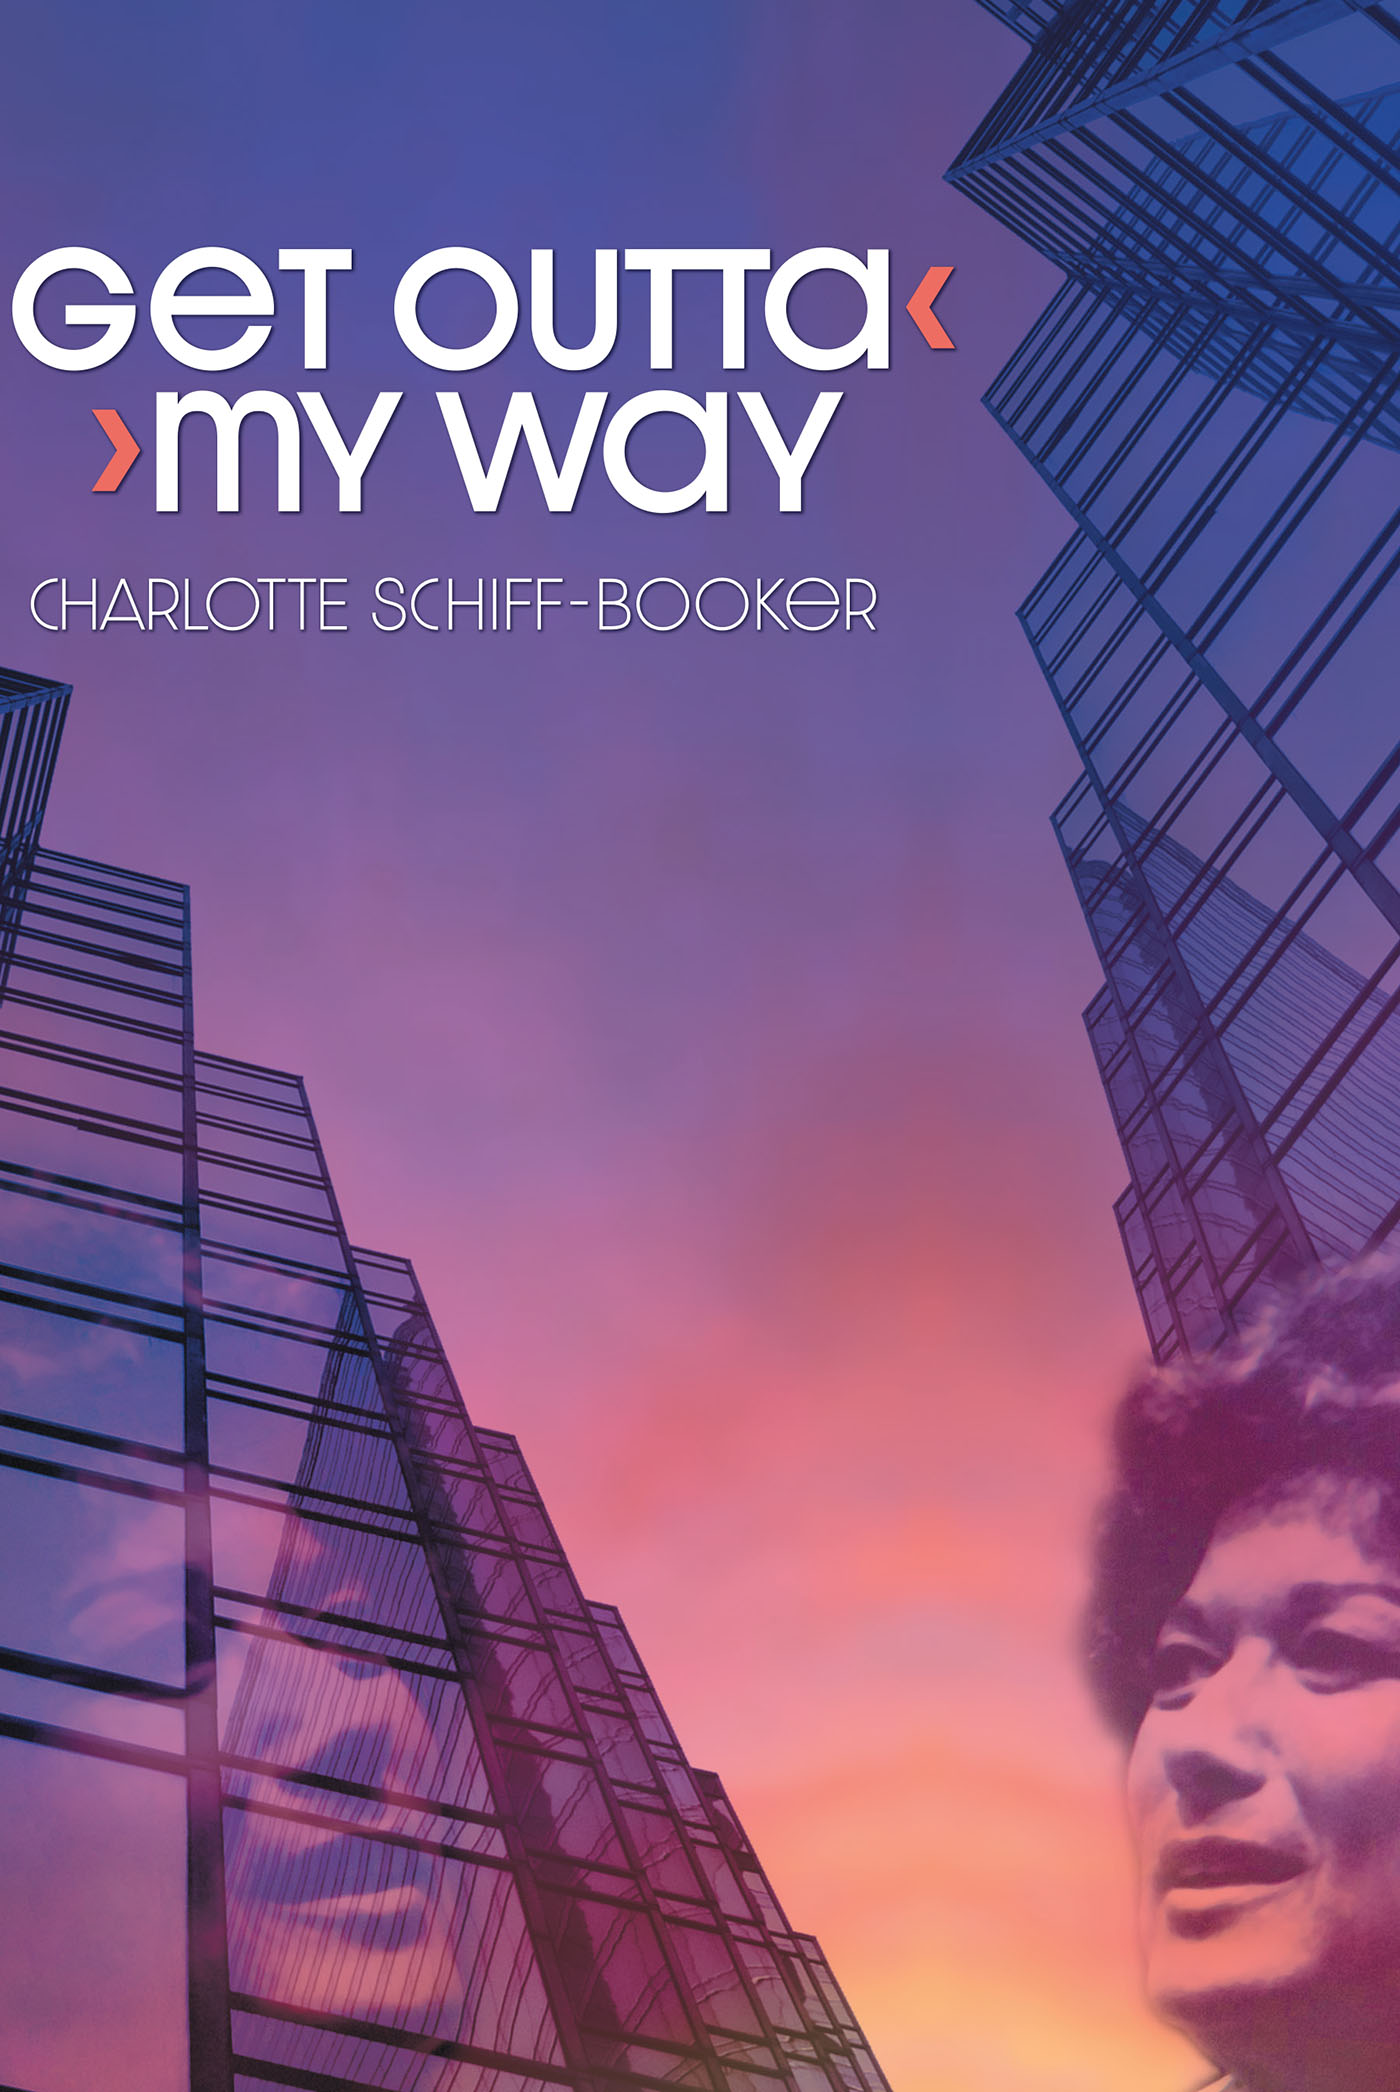 Author Charlotte Schiff-Booker’s New Book “Get Outta My Way: A Storied Life” Documents the Author's Fight for Equality While Breaking Barriers in the Television Industry